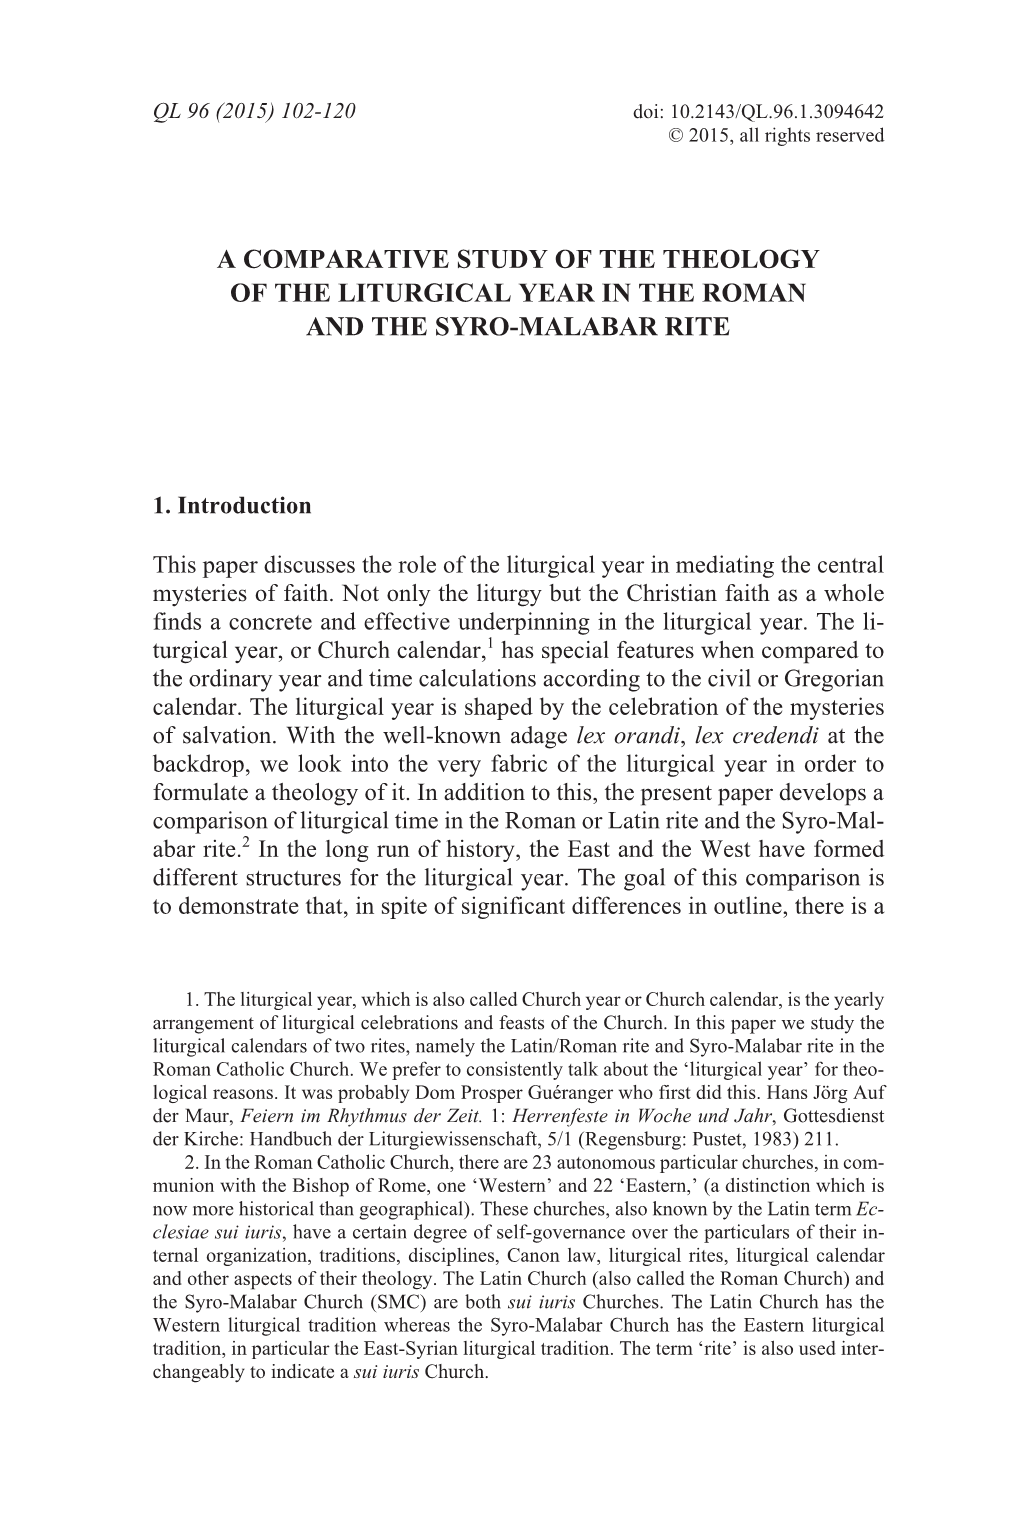 A Comparative Study of the Theology of the Liturgical Year in the Roman and the Syro-Malabar Rite